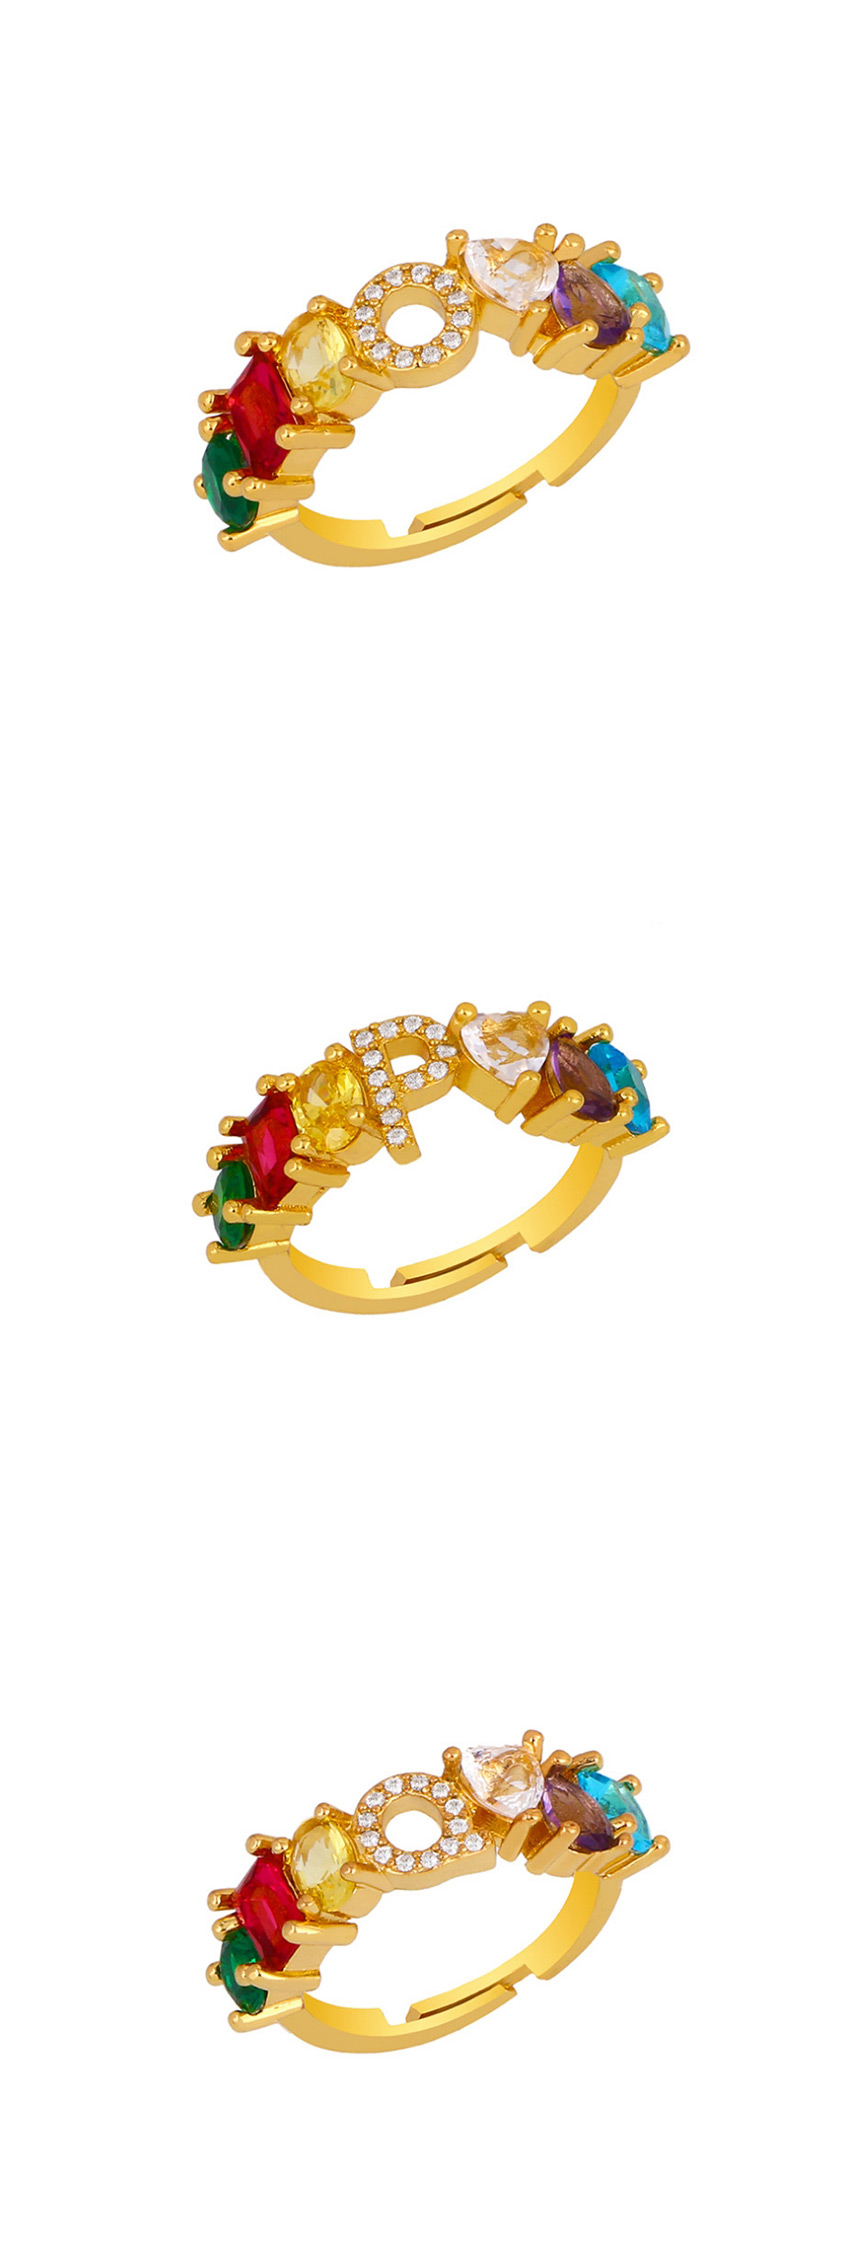 Fashion J Gold Heart-shaped Adjustable Ring With Colorful Diamond Letters,Rings